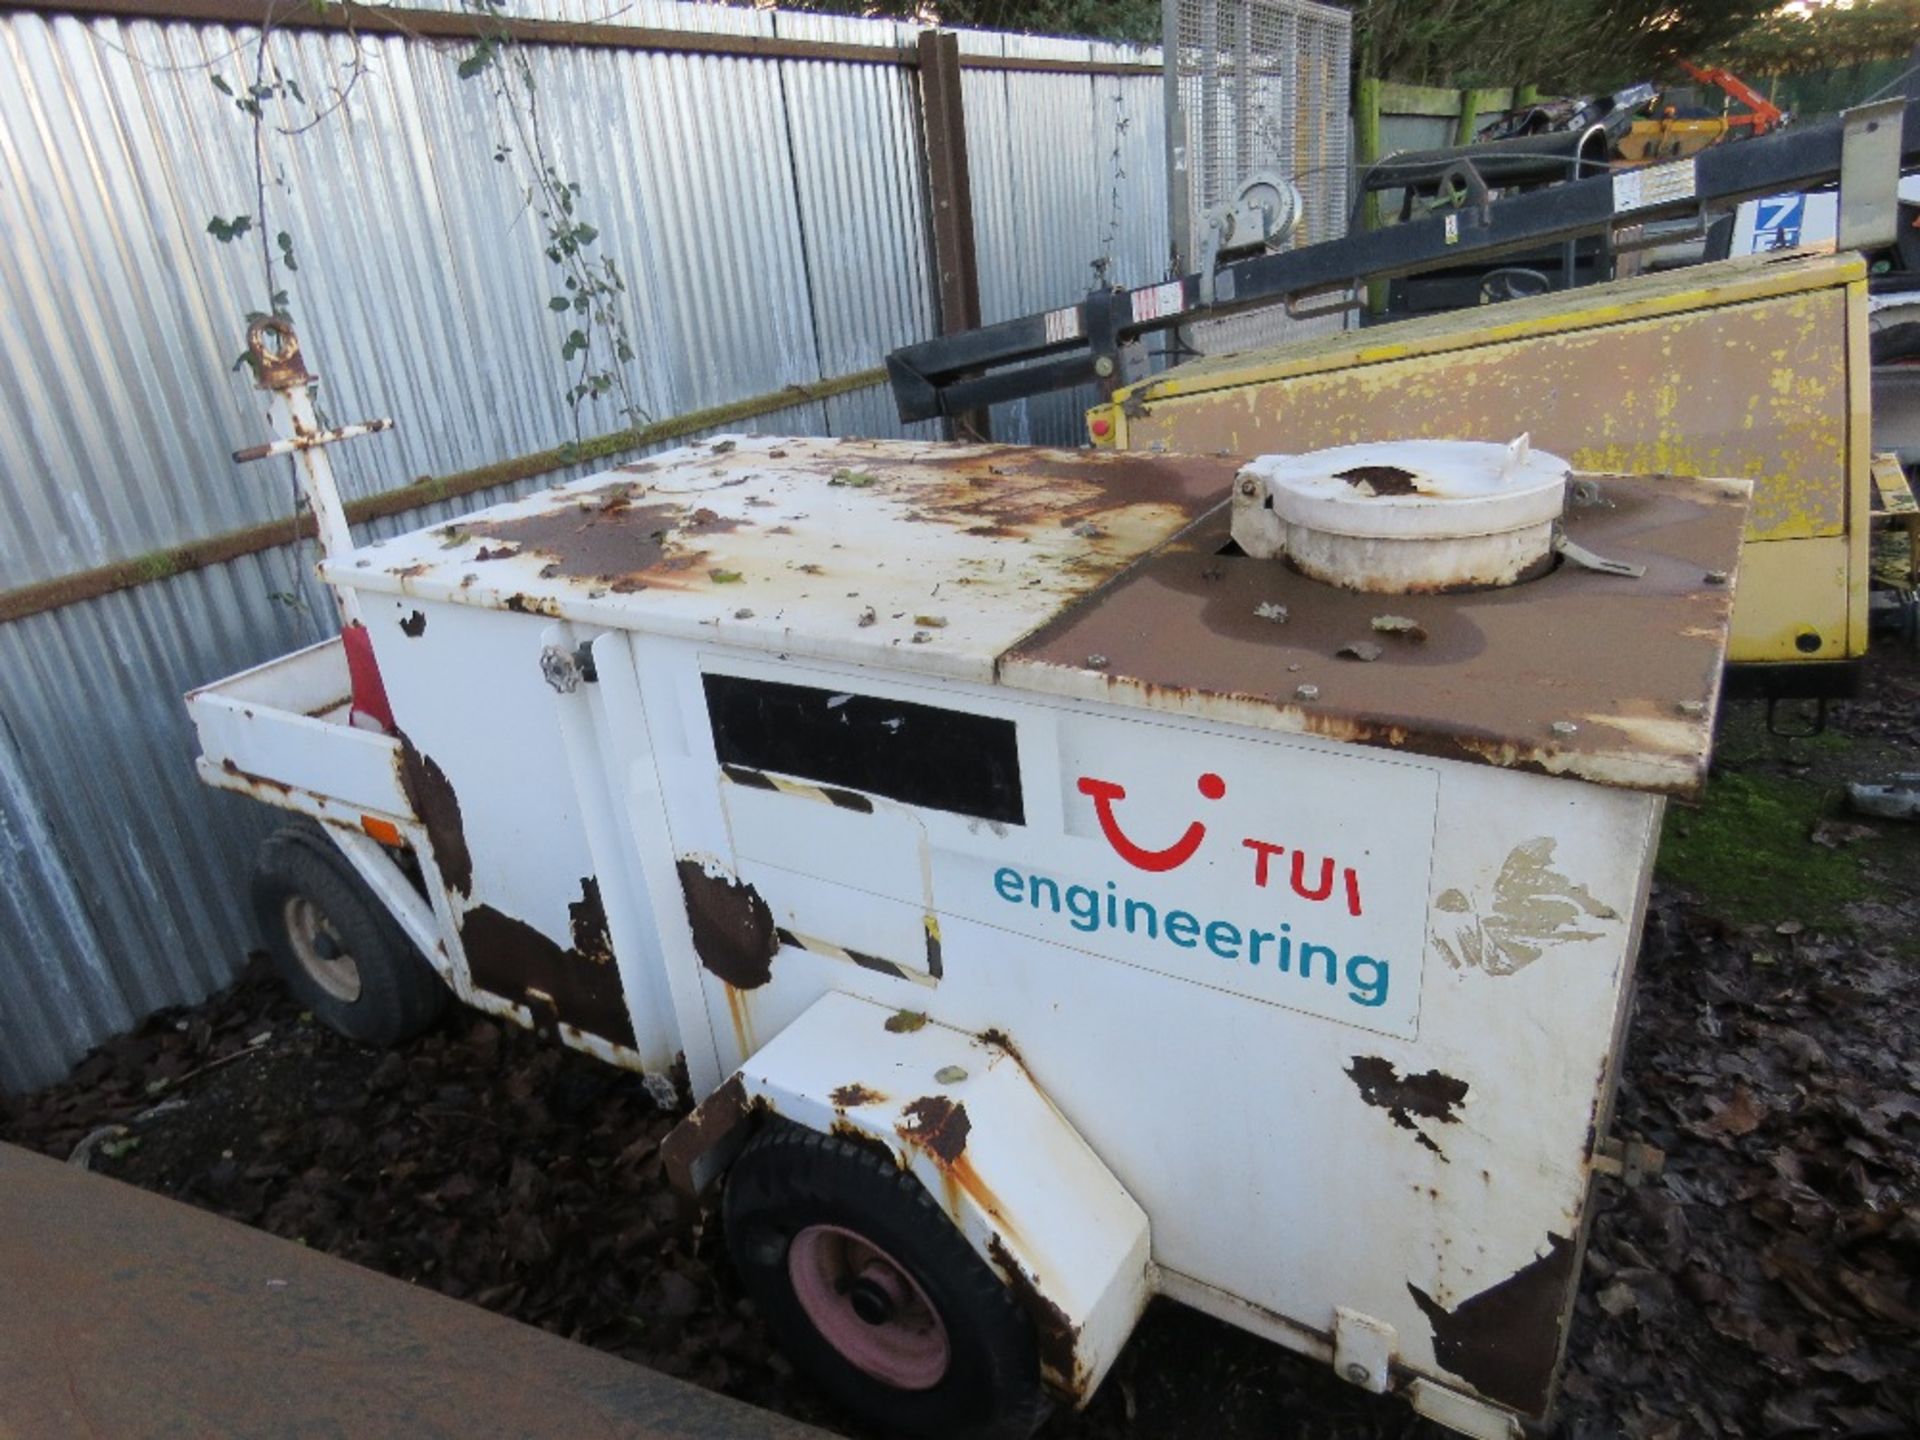 4 WHEELED WASTE OIL COLLECTION TRAILER, PREVIOUSLY USED AT MAJOR AIRPORT. - Image 4 of 4